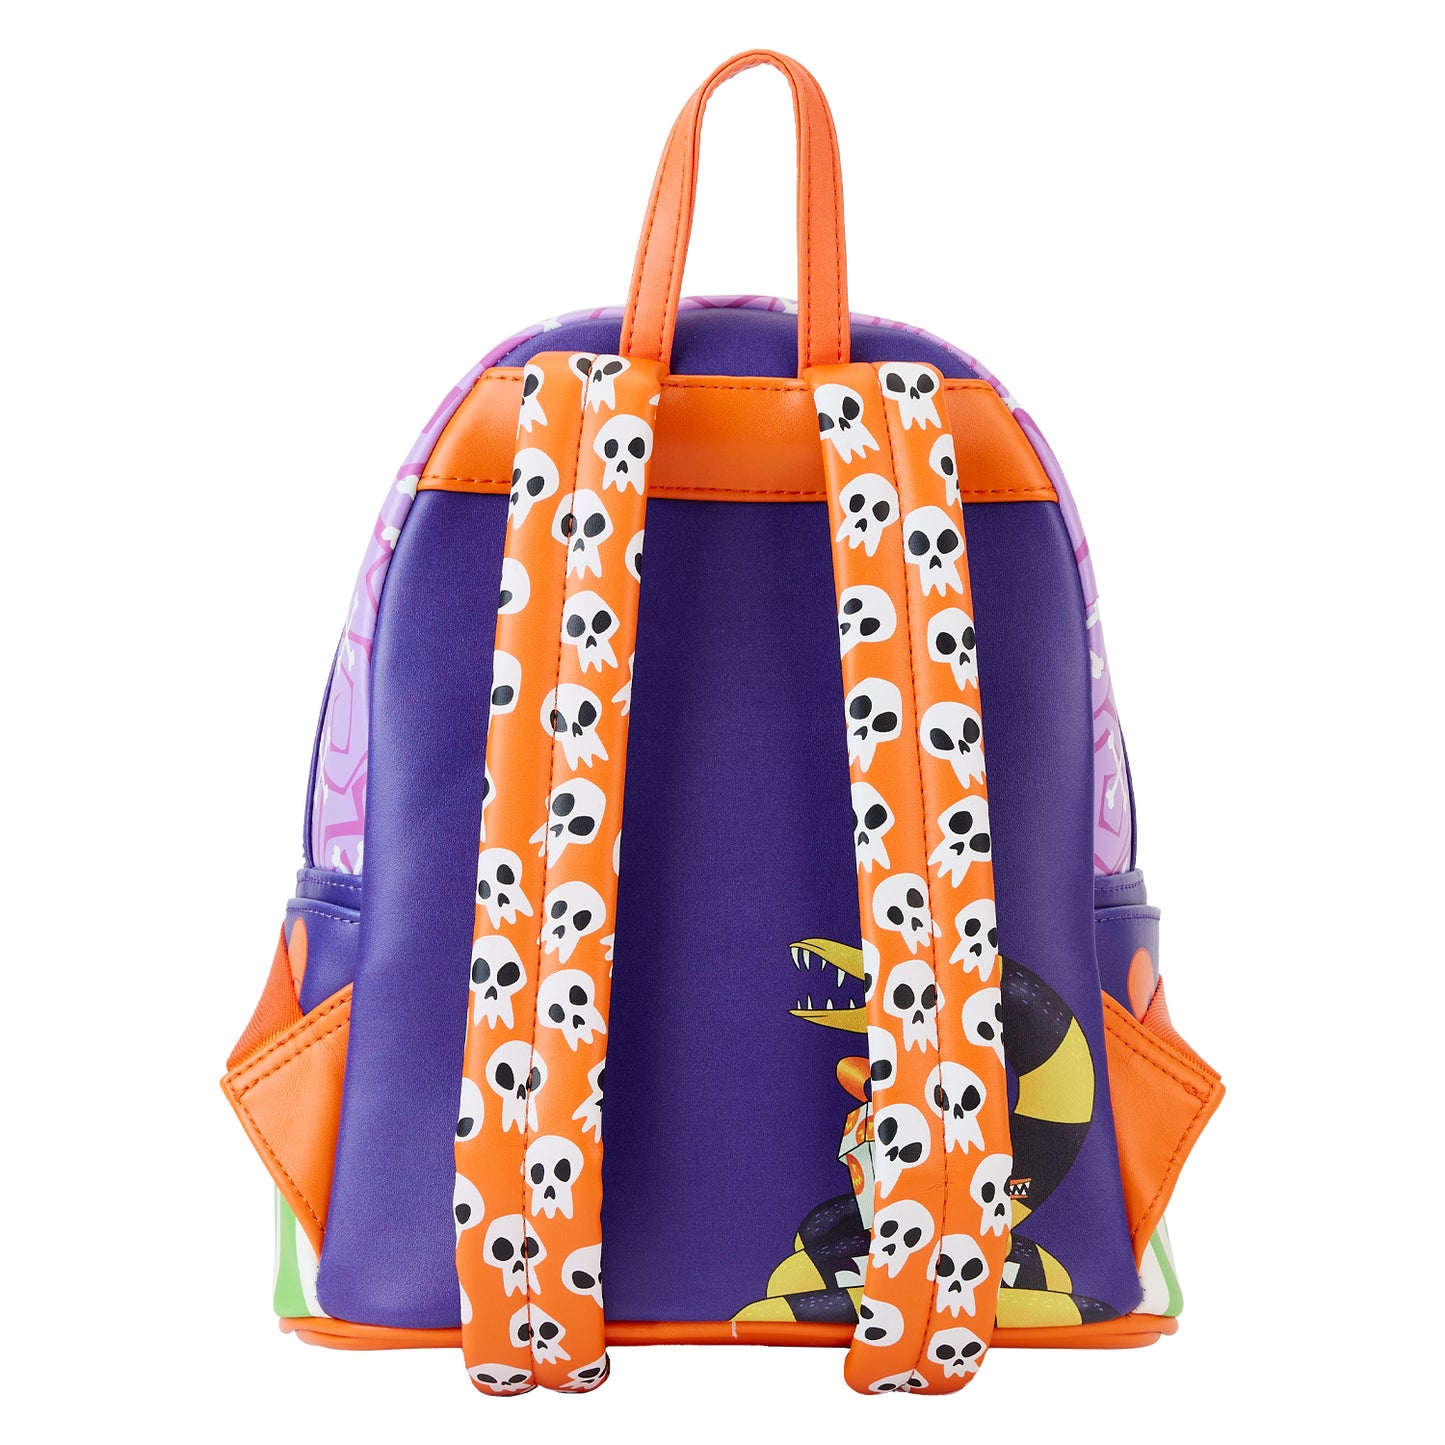 Loungefly Disney Nightmare Before Christmas Scary Teddy Present Mini Backpack